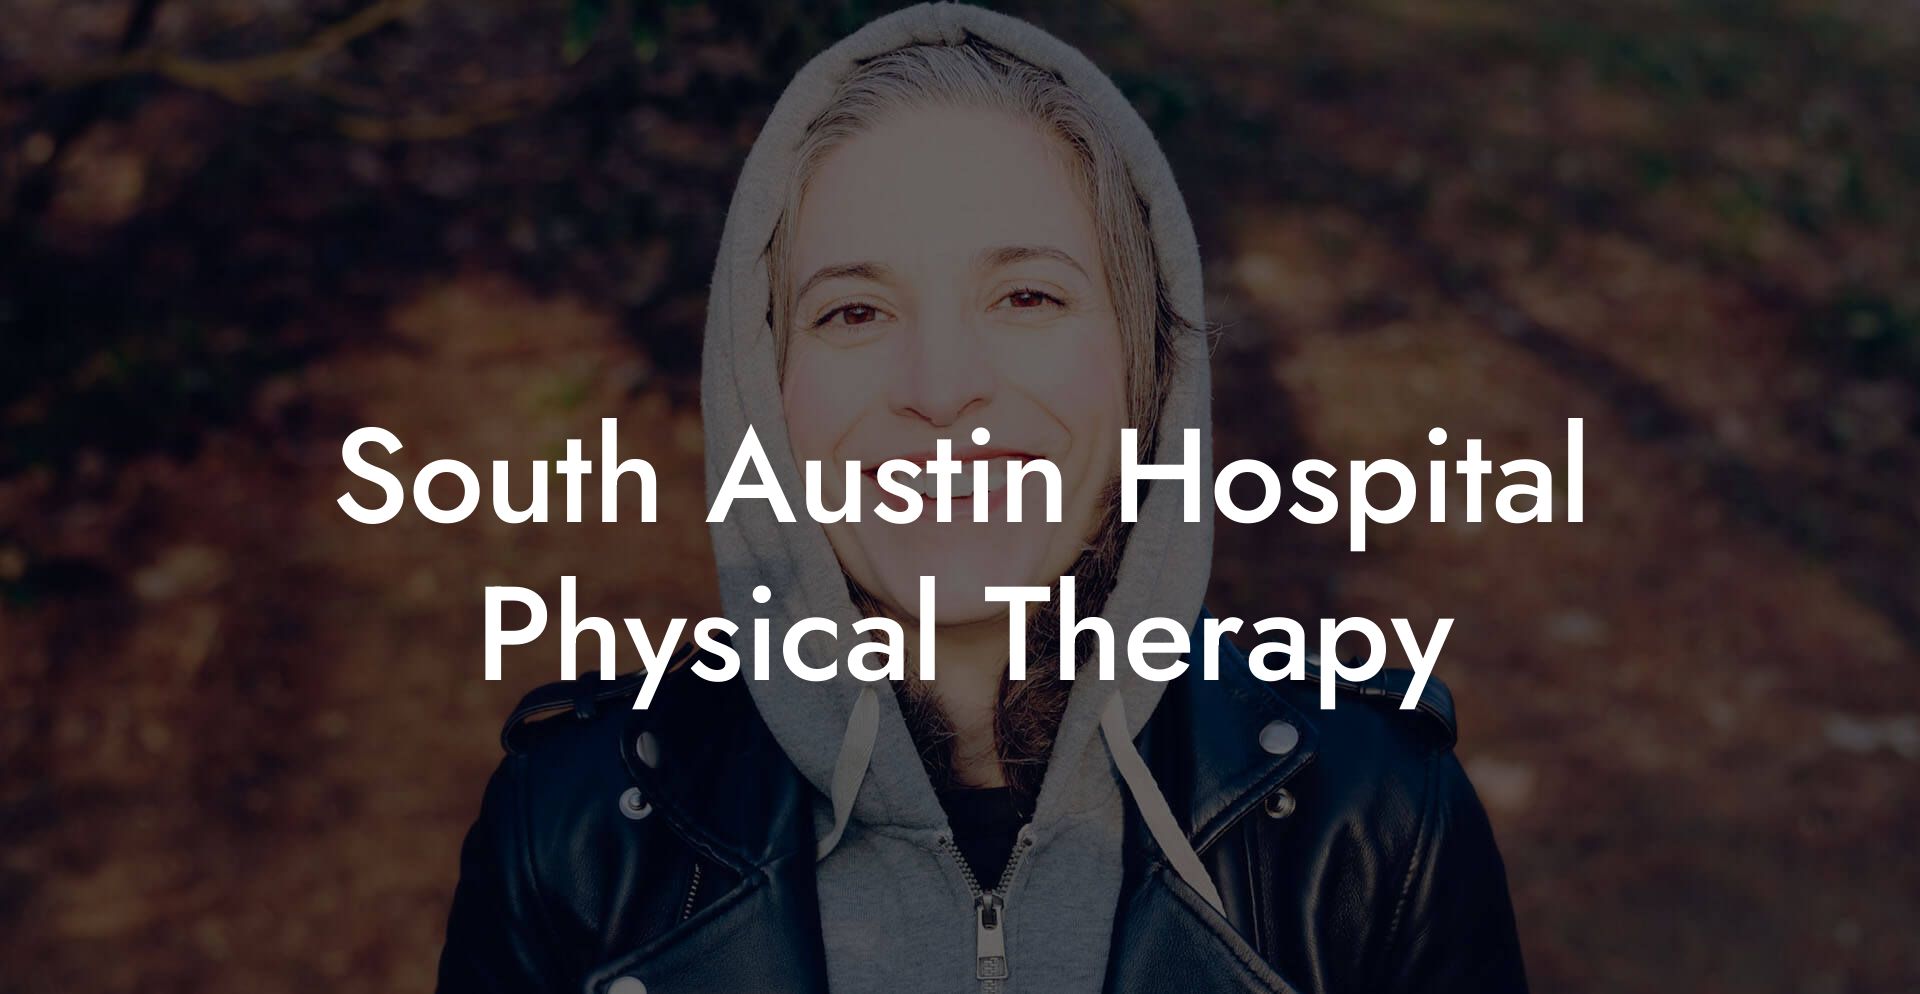 South Austin Hospital Physical Therapy